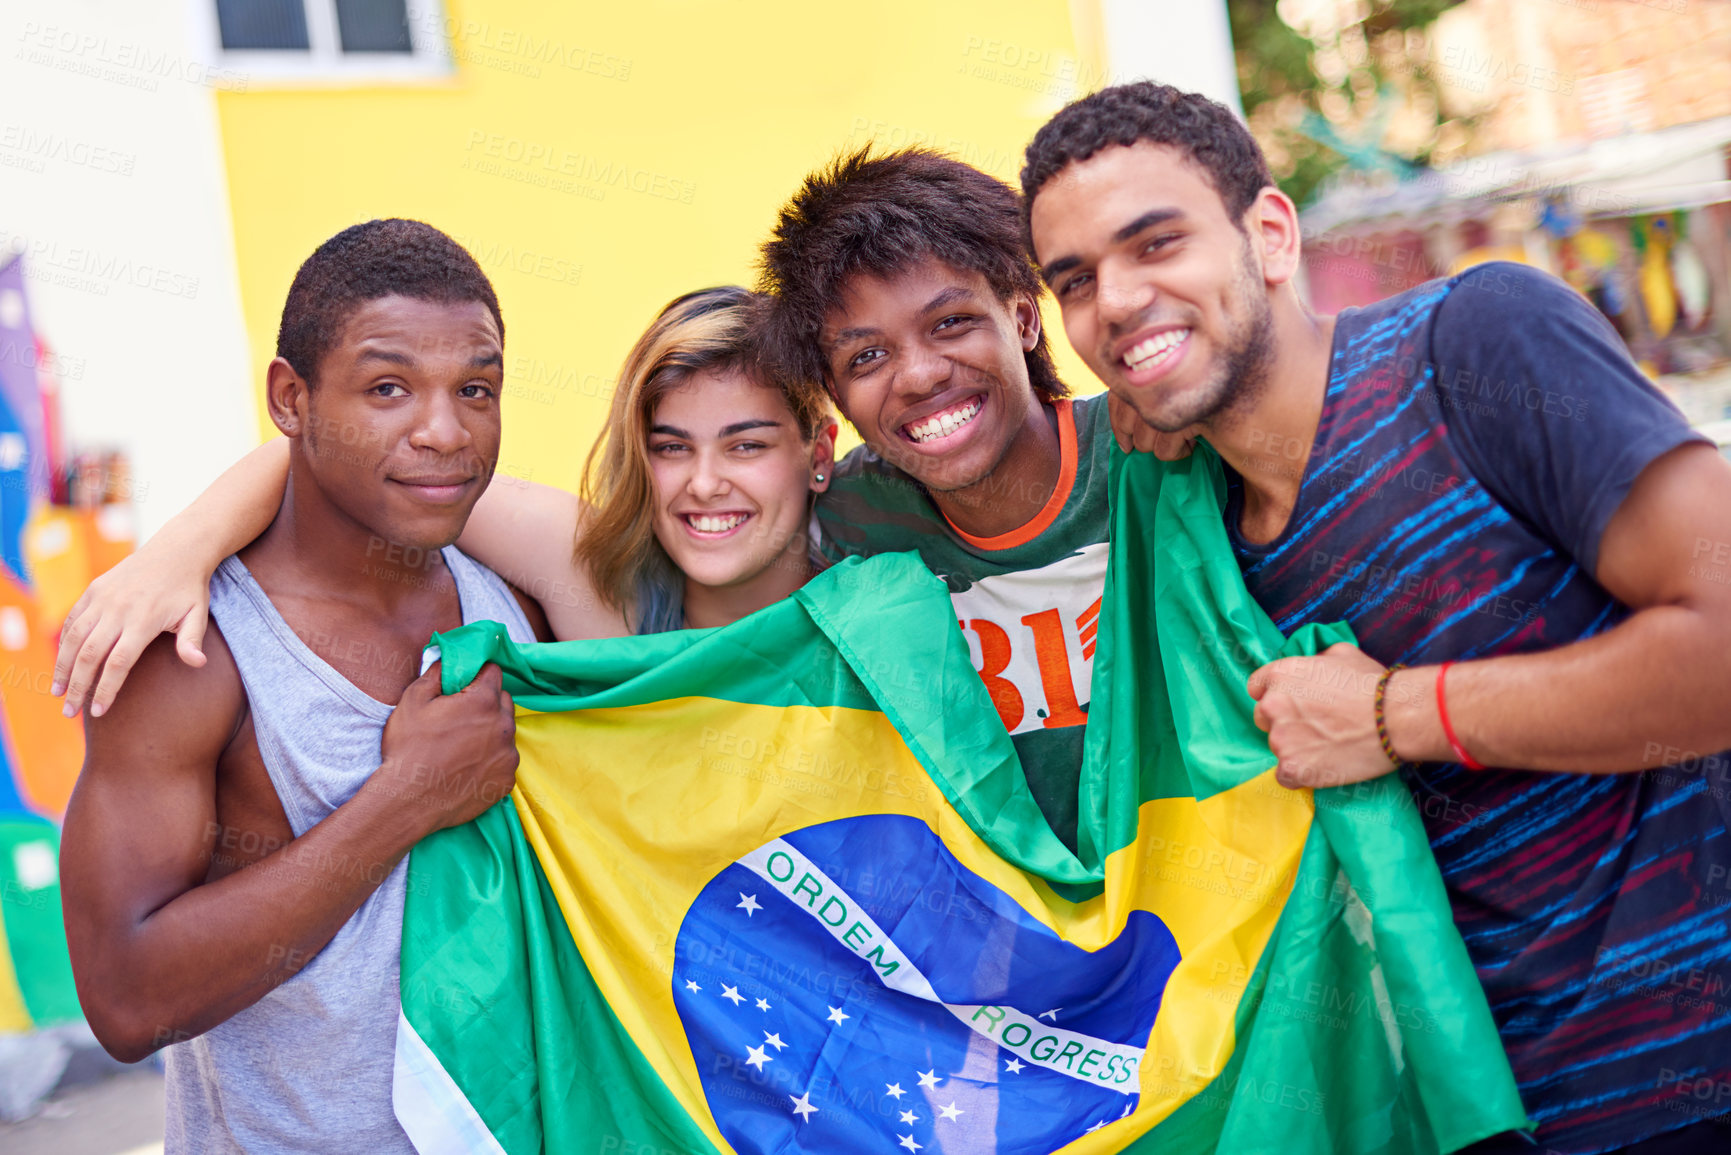 Buy stock photo Portrait of a group of teenagers holding up the Brazilian flag